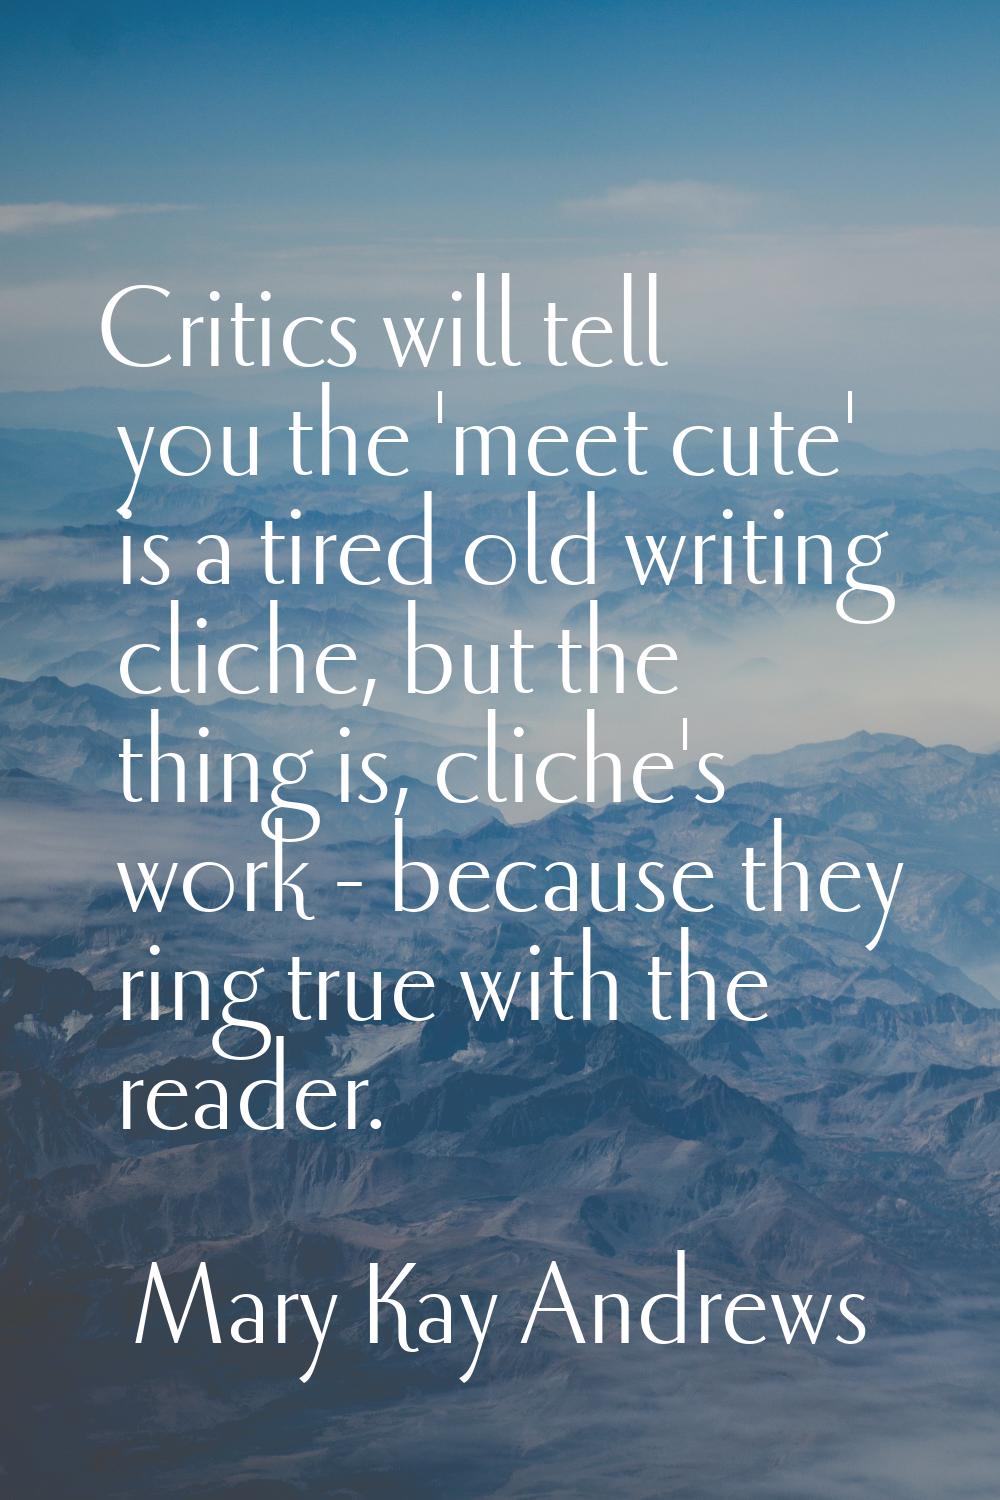 Critics will tell you the 'meet cute' is a tired old writing cliche, but the thing is, cliche's wor